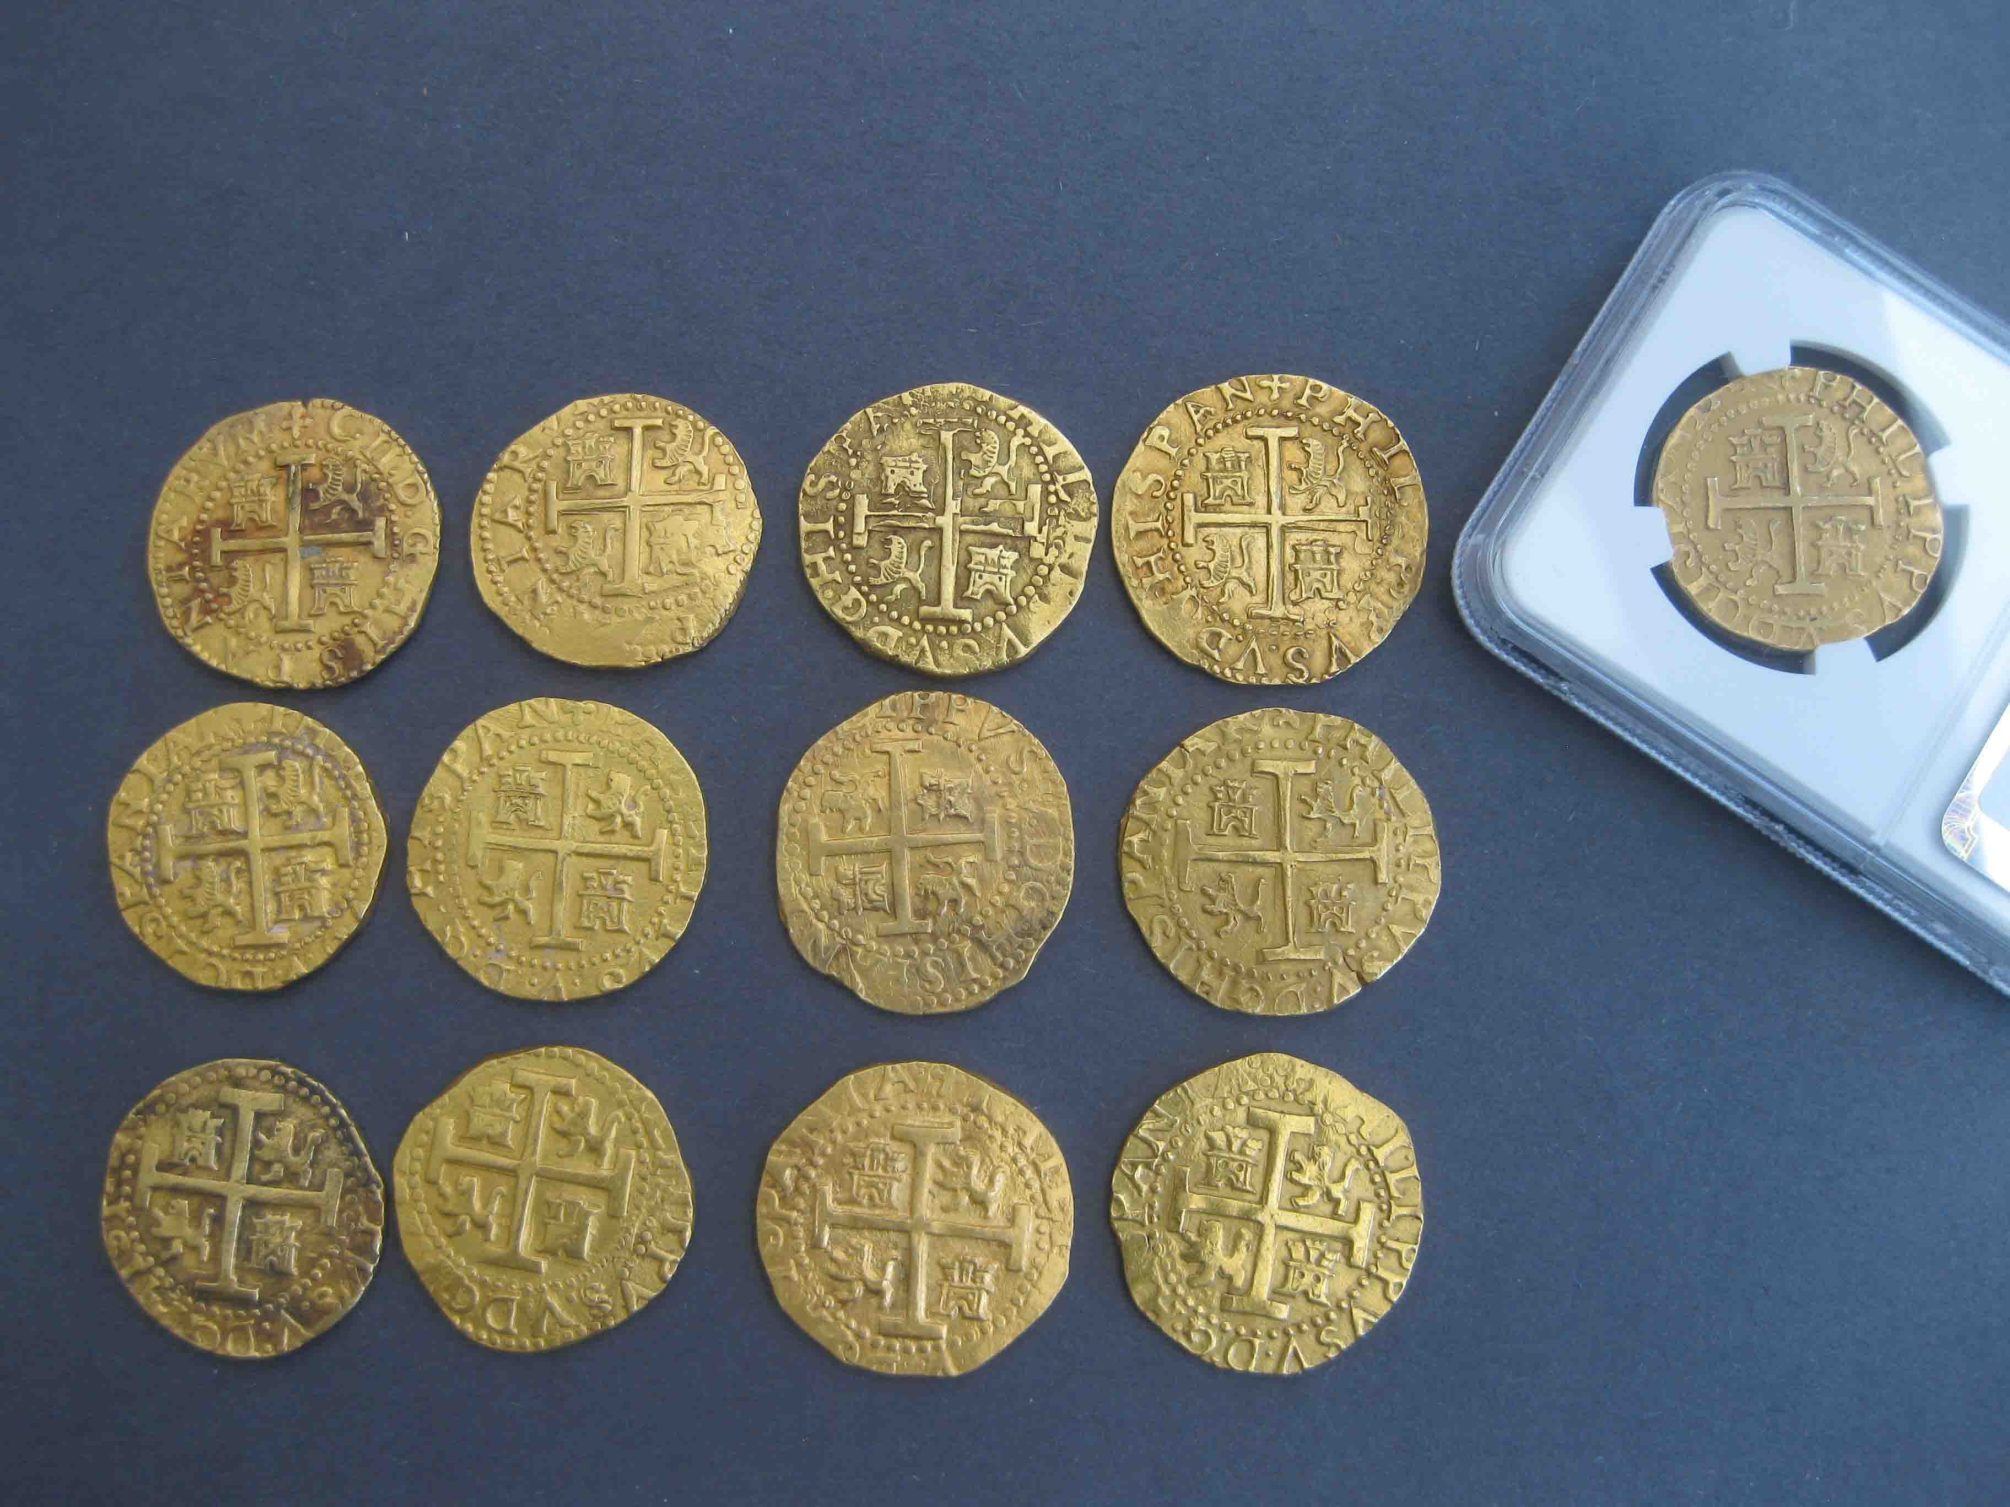 Lima 8 Escudos from 1699 to 1714 - obverse